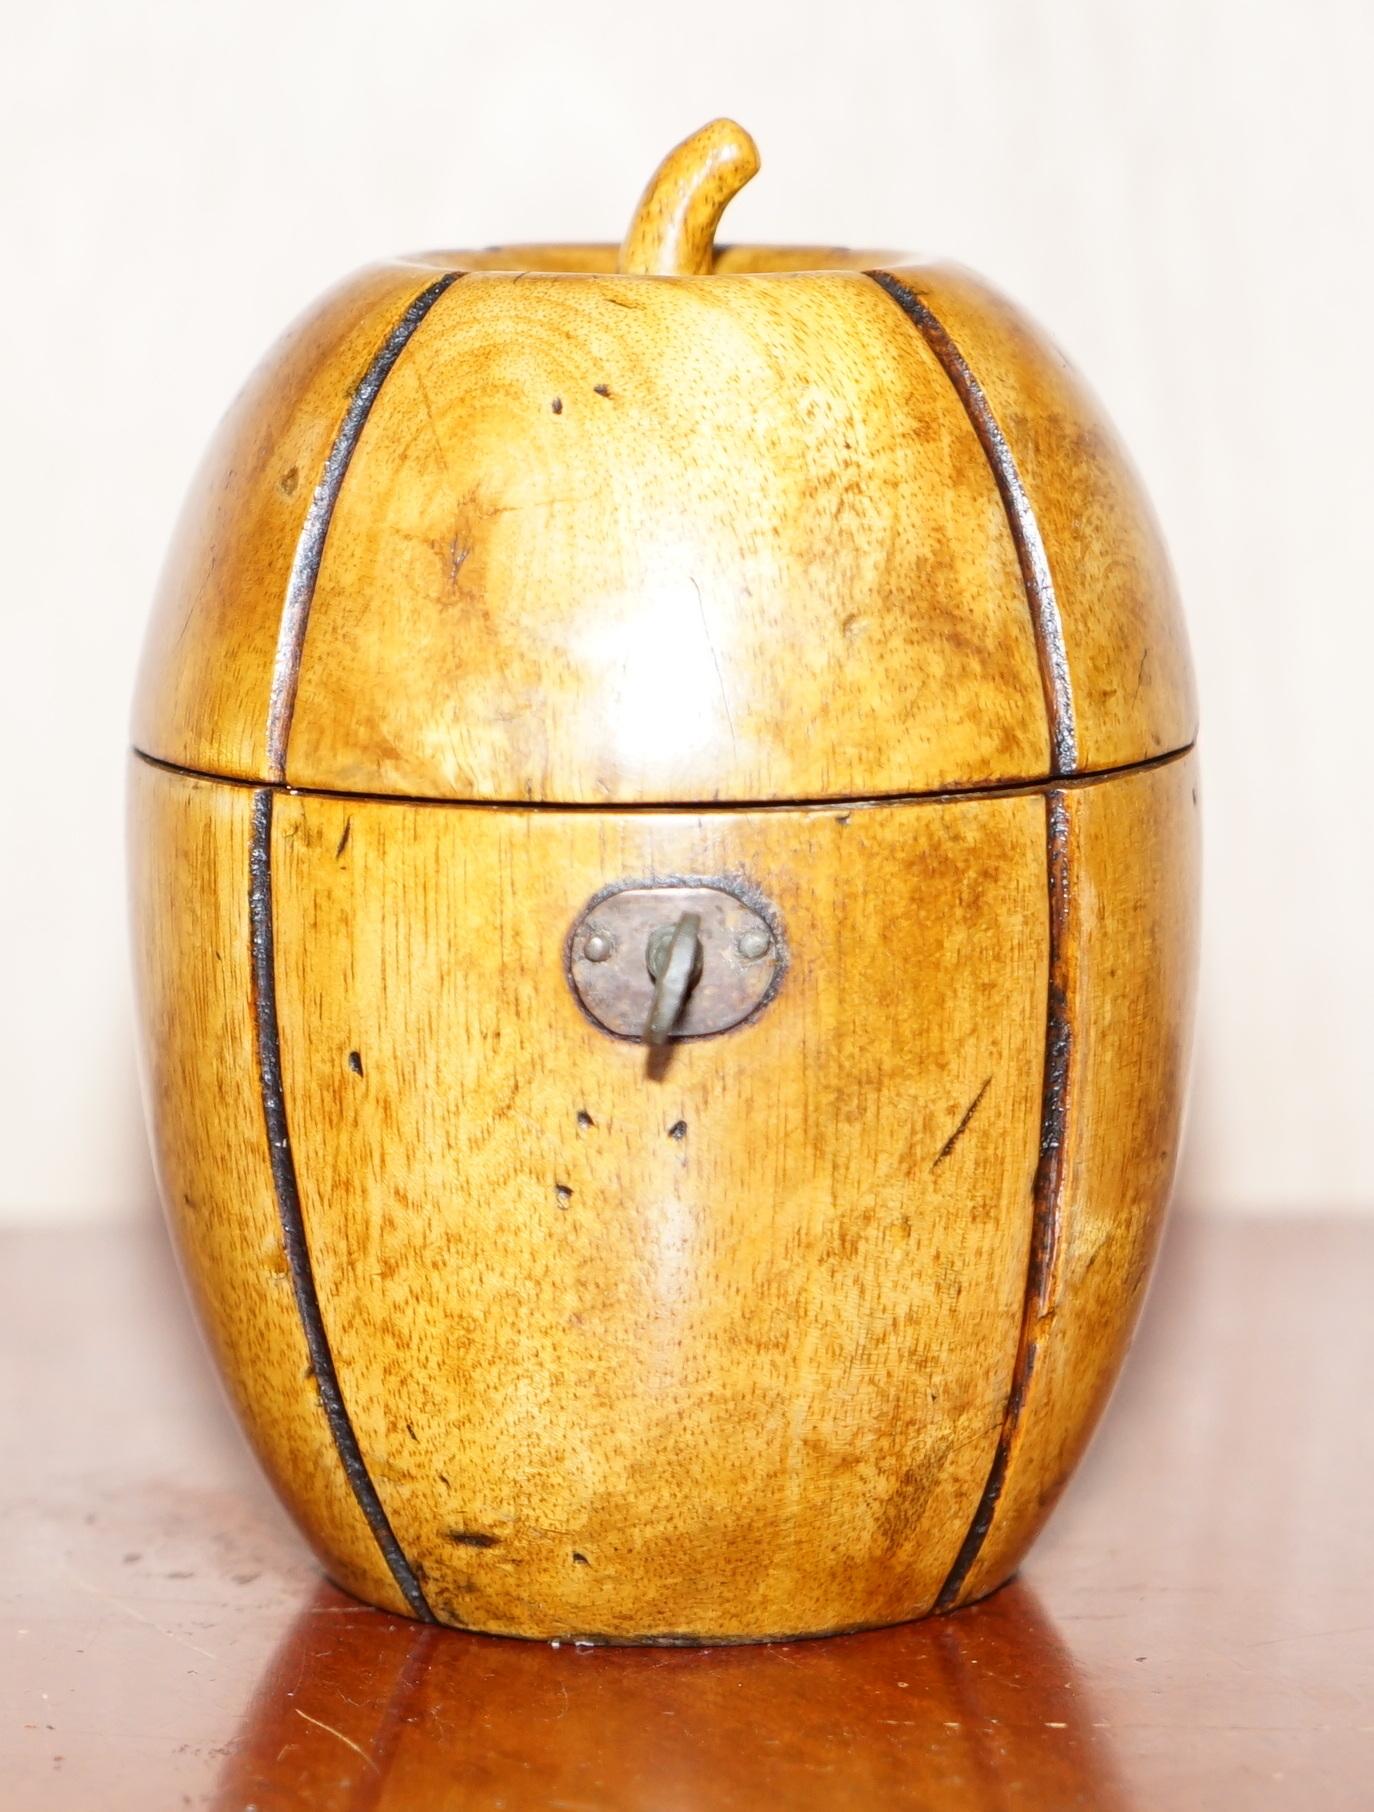 We are delighted to offer for sale this lovely early 19th century Treen carved wood apple tea caddy with original key

A highly collectable and decorative tea caddy, some of these retail for £3000-£5000, just look on 1stdibs and you will see